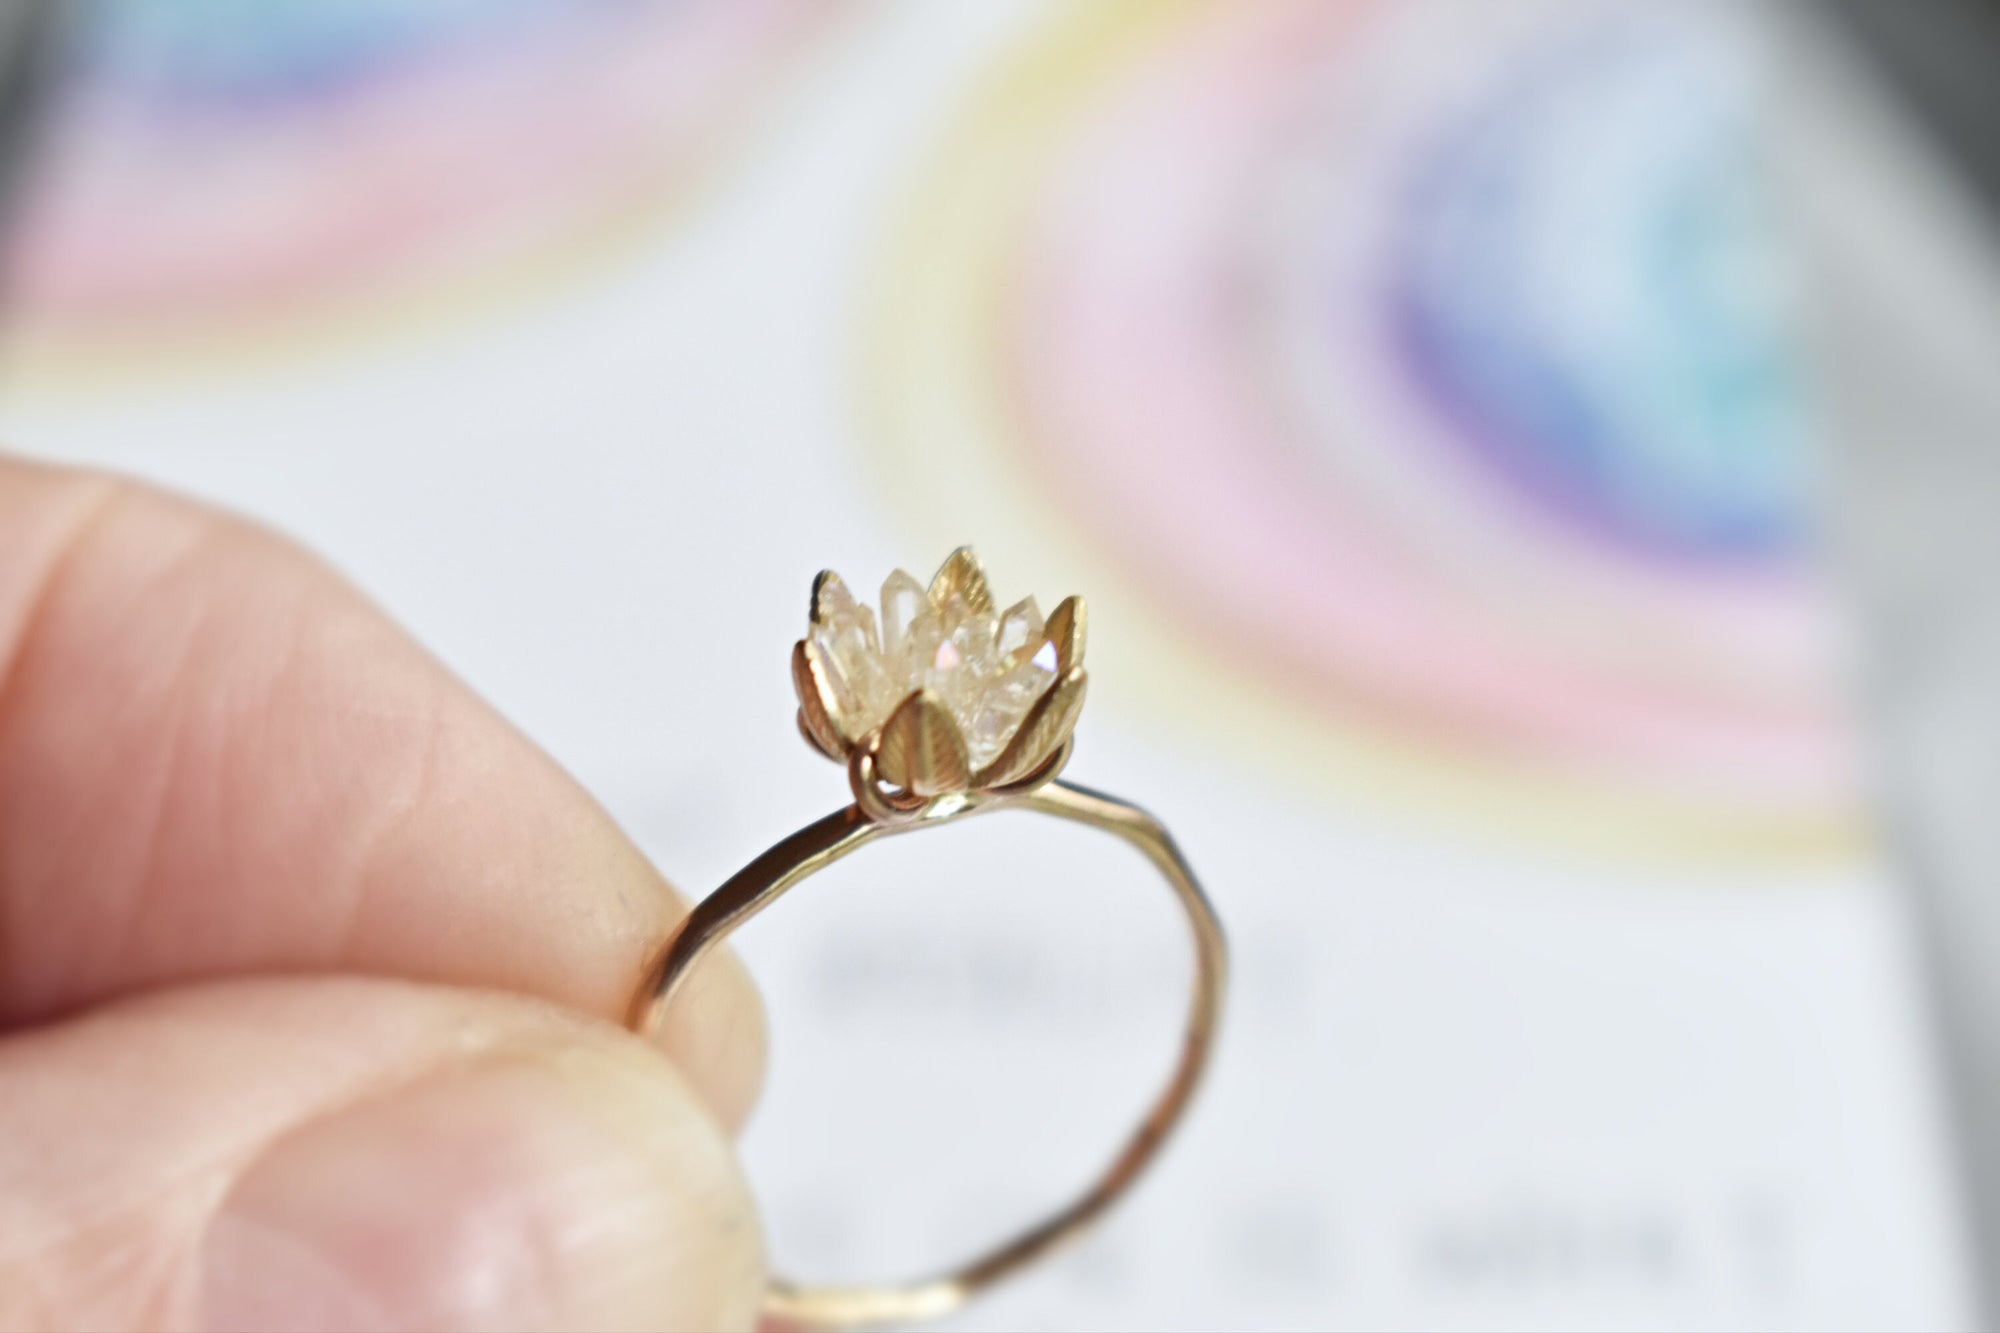 Angel Aura Crystal and 14K Yellow Gold Fill Ring, Lotus Flower Jewelry, Crystal Point Floral Ring, Unique Gift for Mom or Sister Valentines